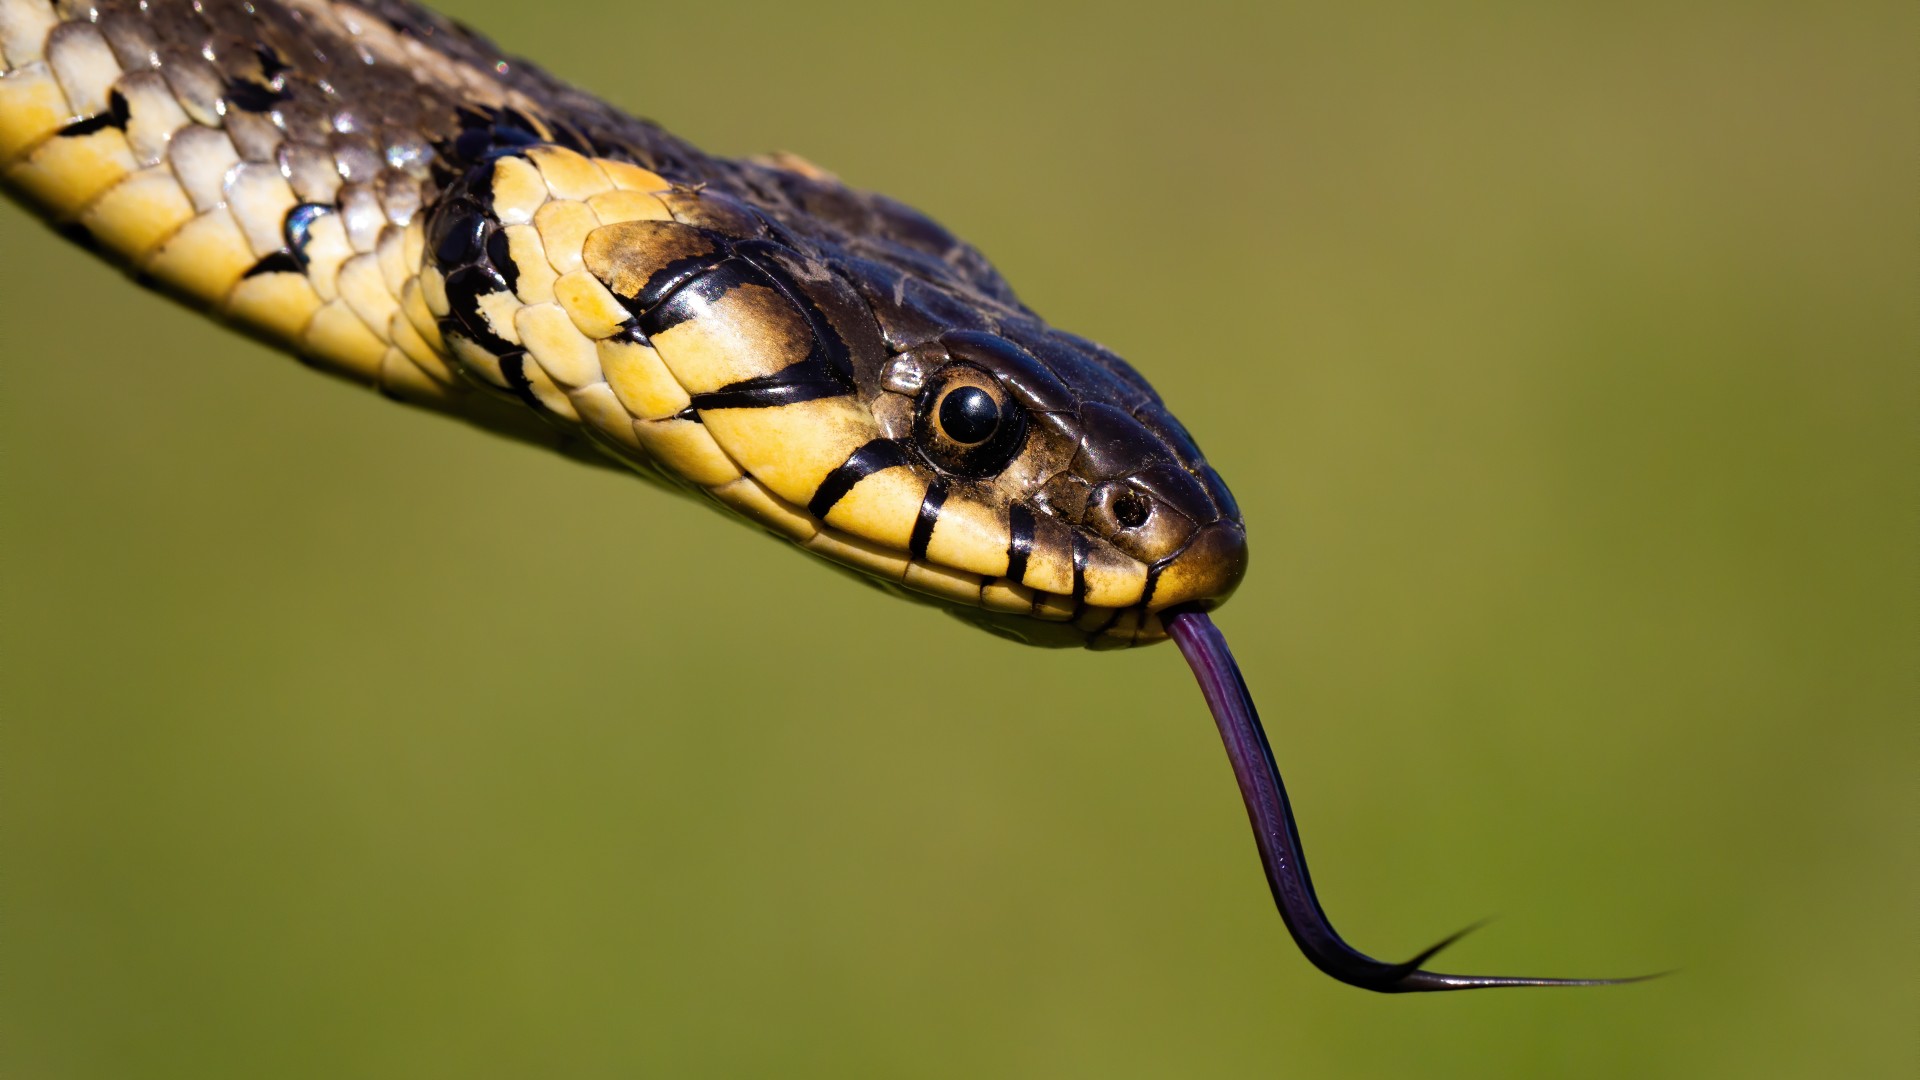 How and why is hissing so common in the animal kingdom?